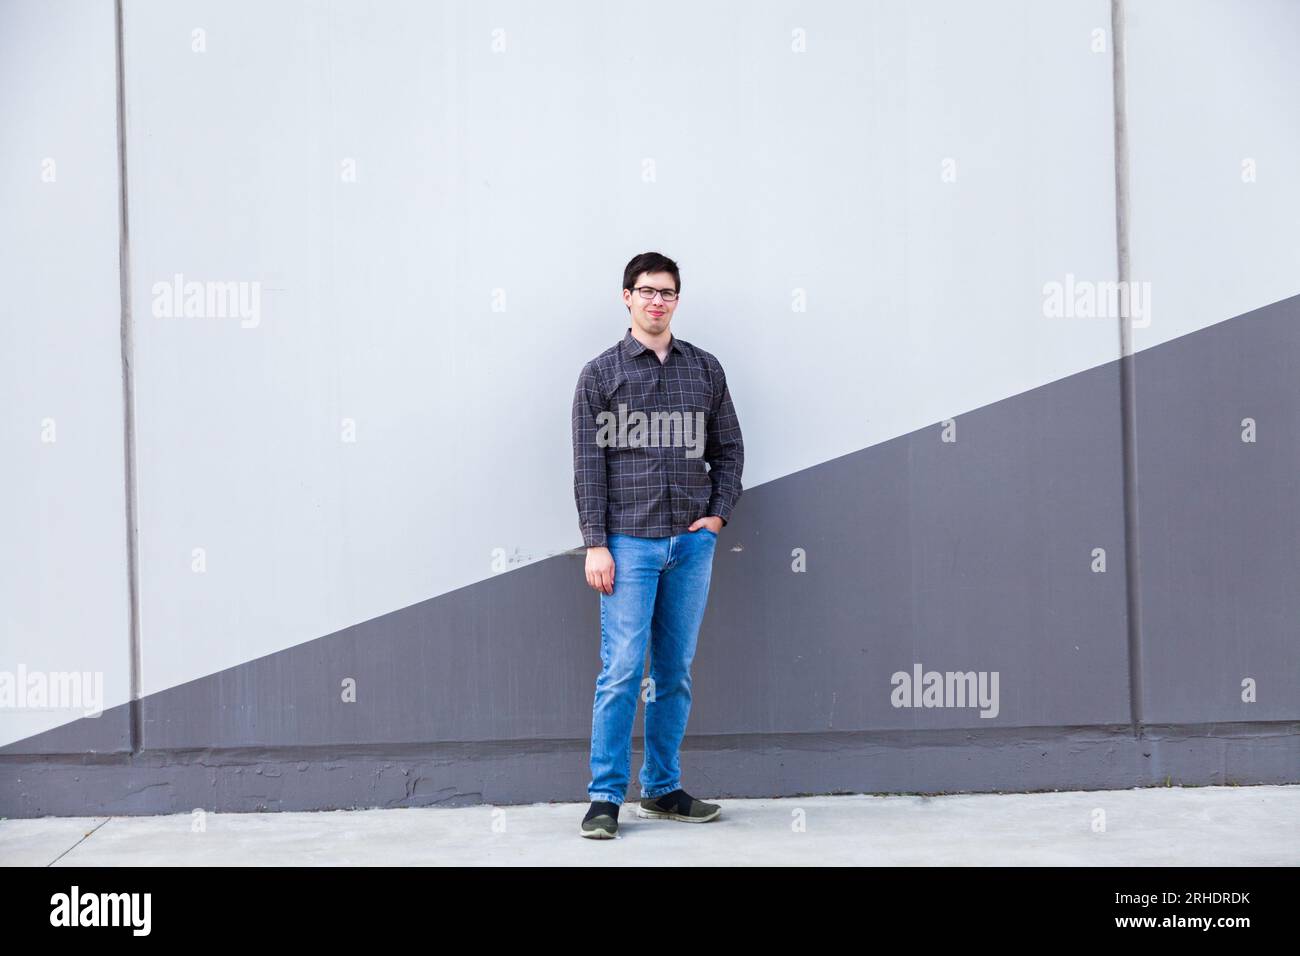 Young man standing in urban area against grey wall with slash down centre in angle Stock Photo